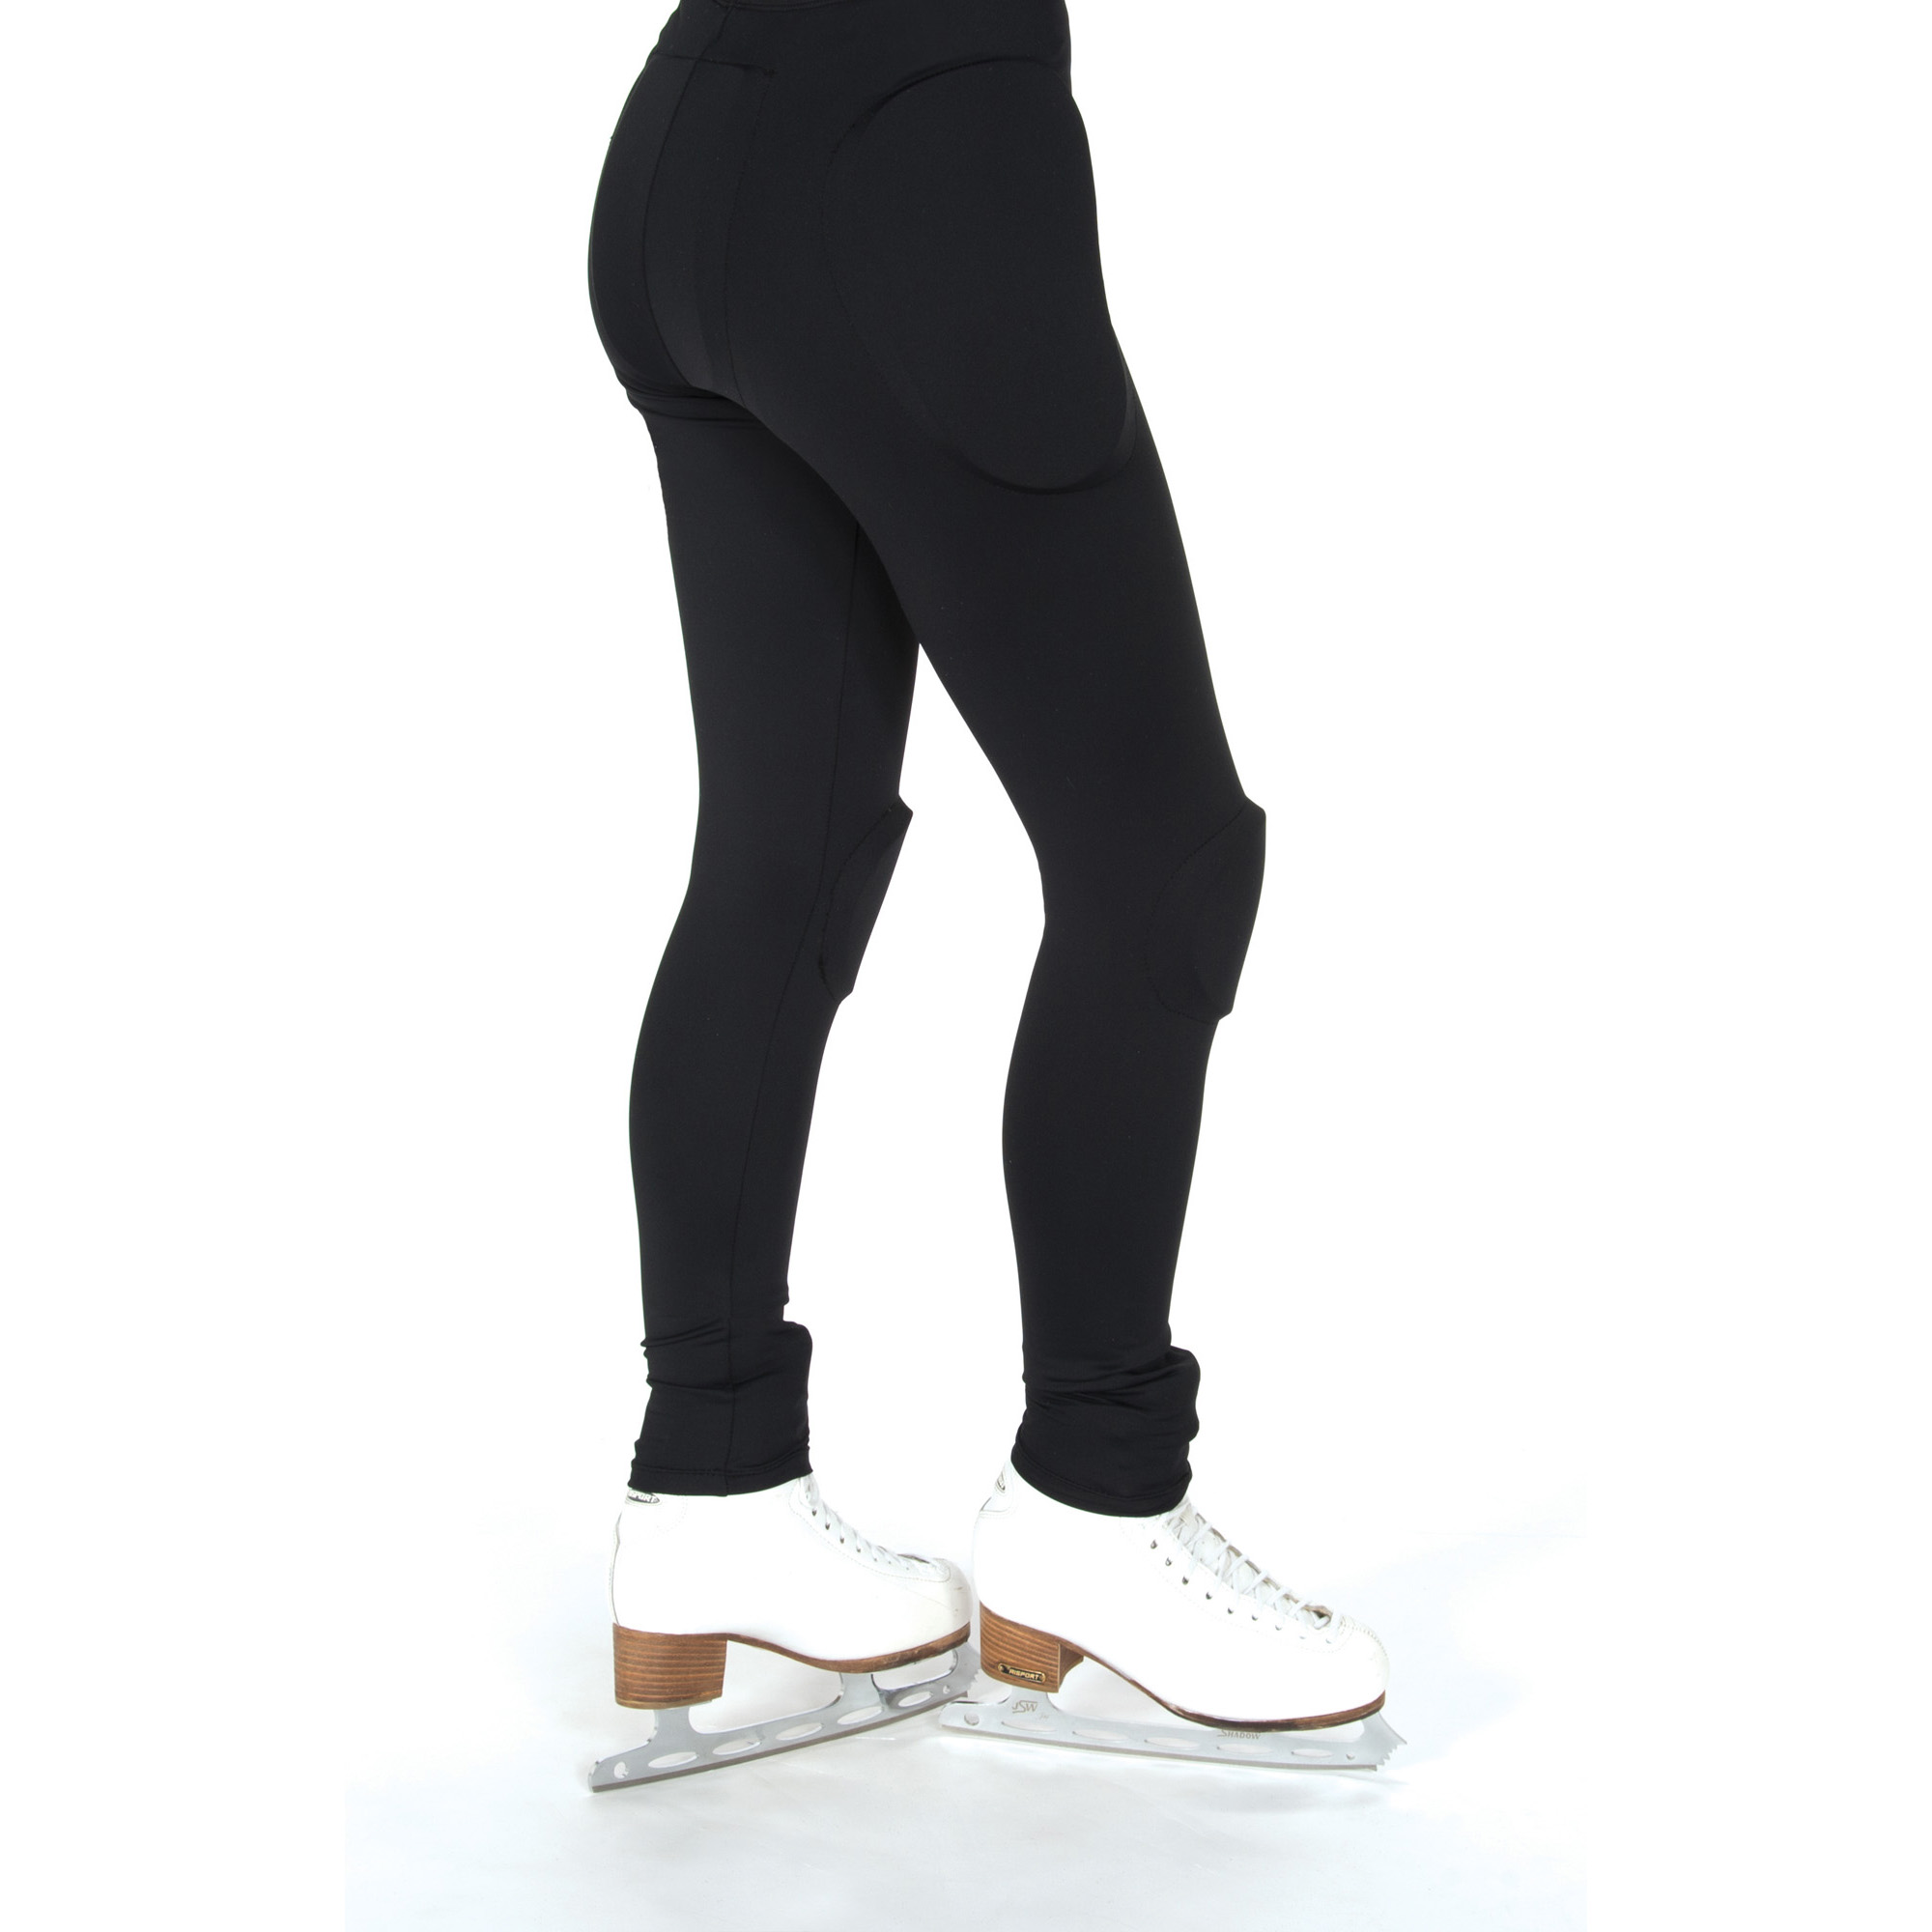 852 Jerry's Protective Leggings - Black Only - Jerry's Skating World